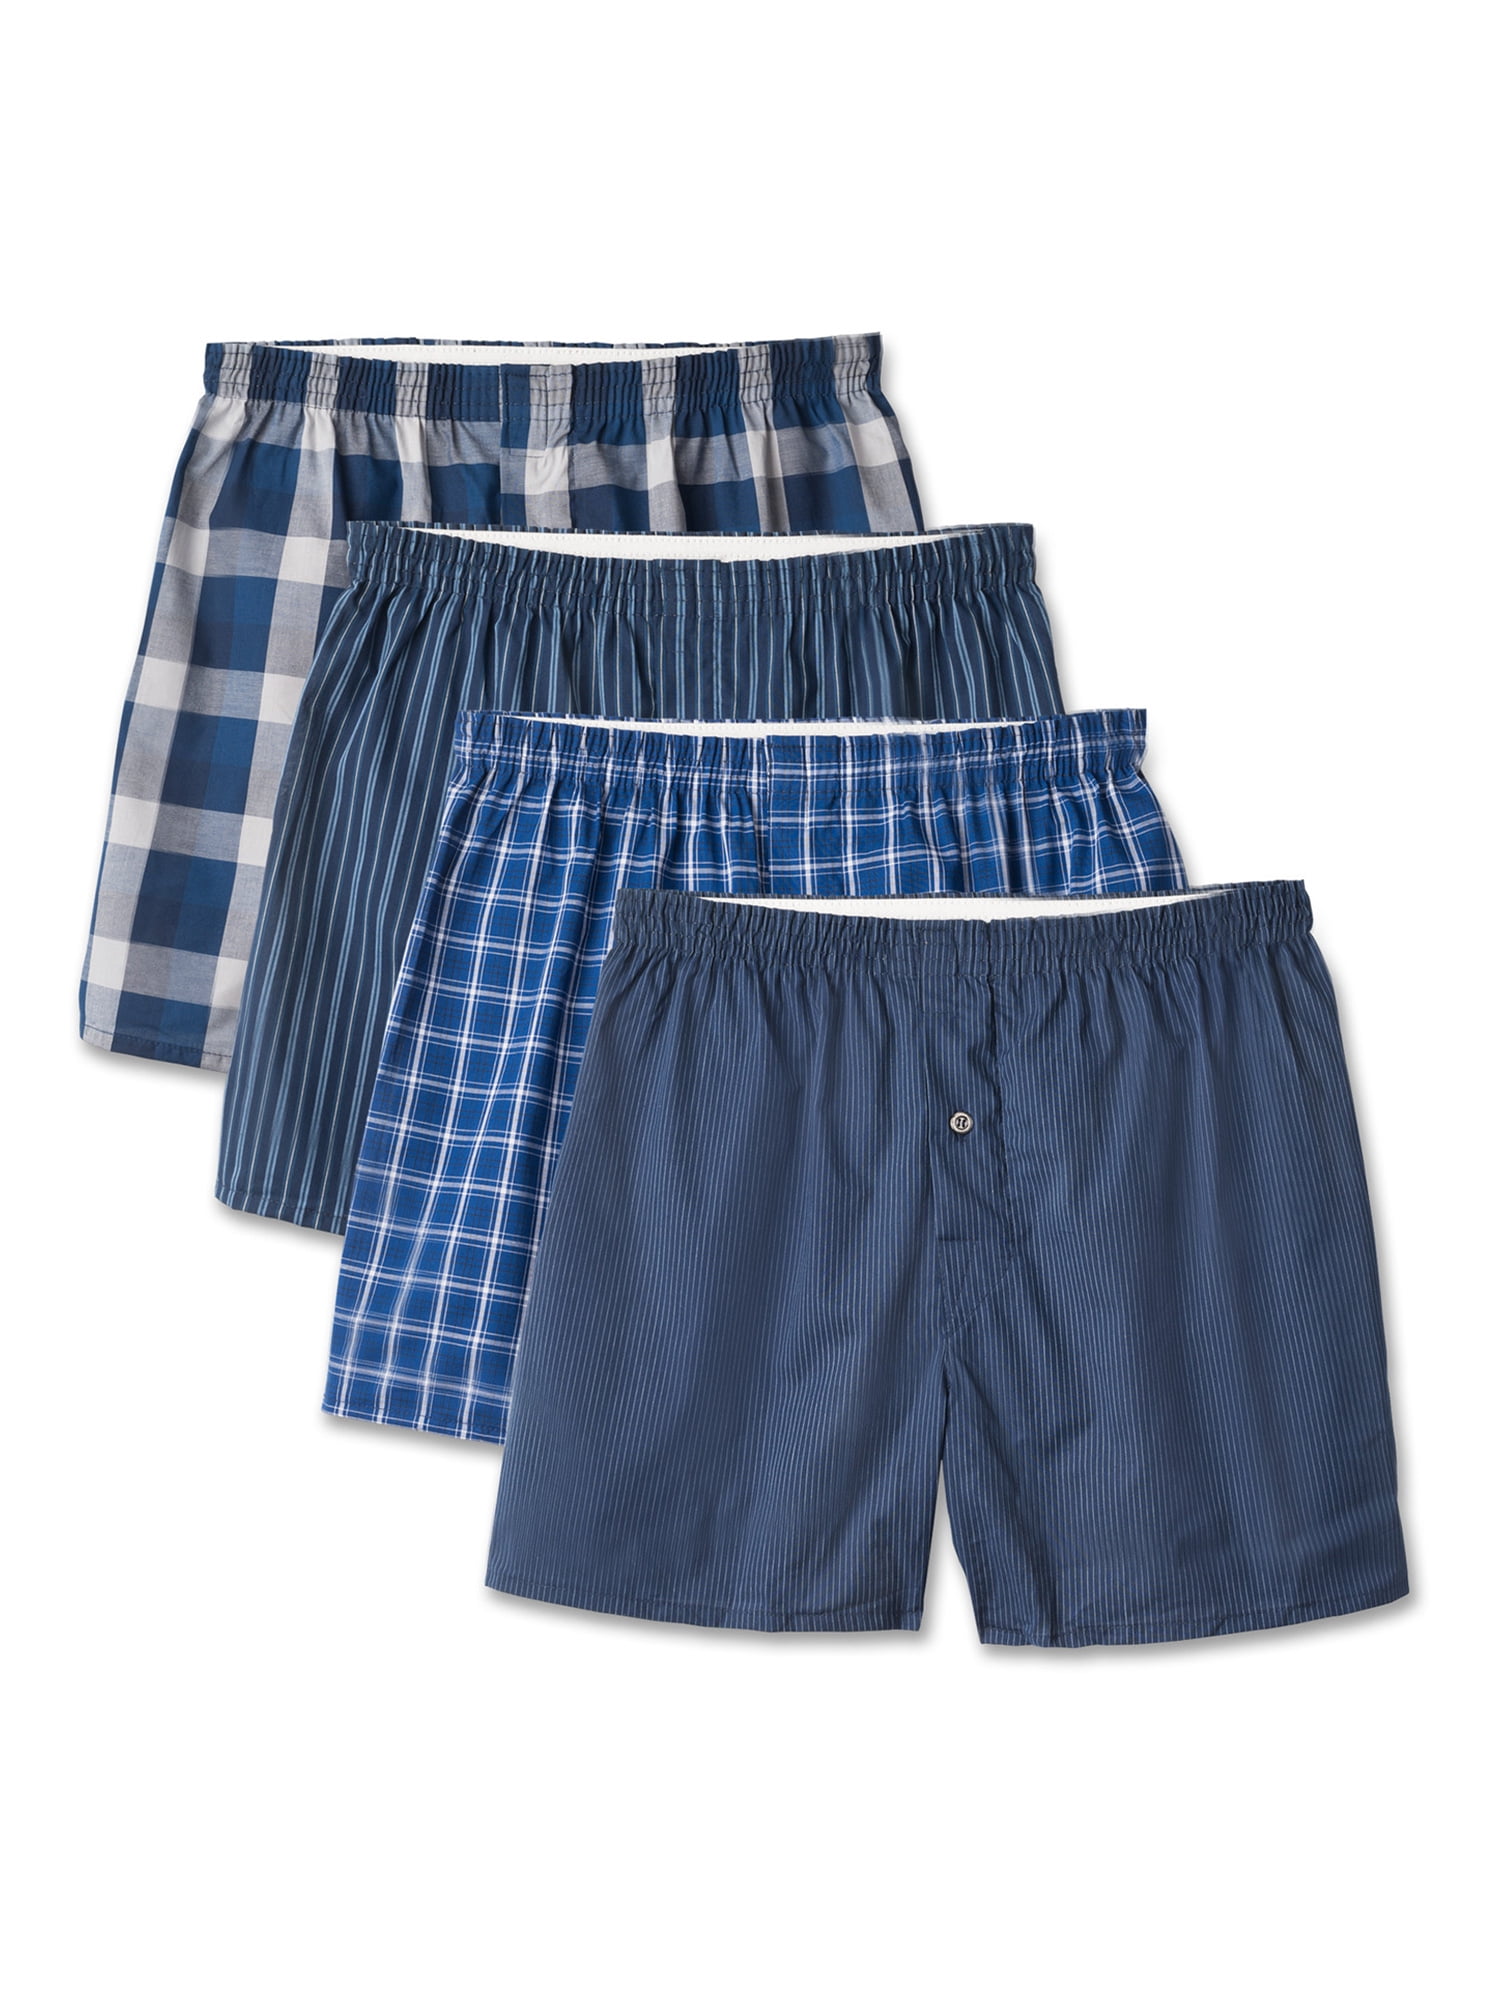 Fruit of the Loom Premium Men's Woven Boxers, 4 Pack, Sizes S-XL ...